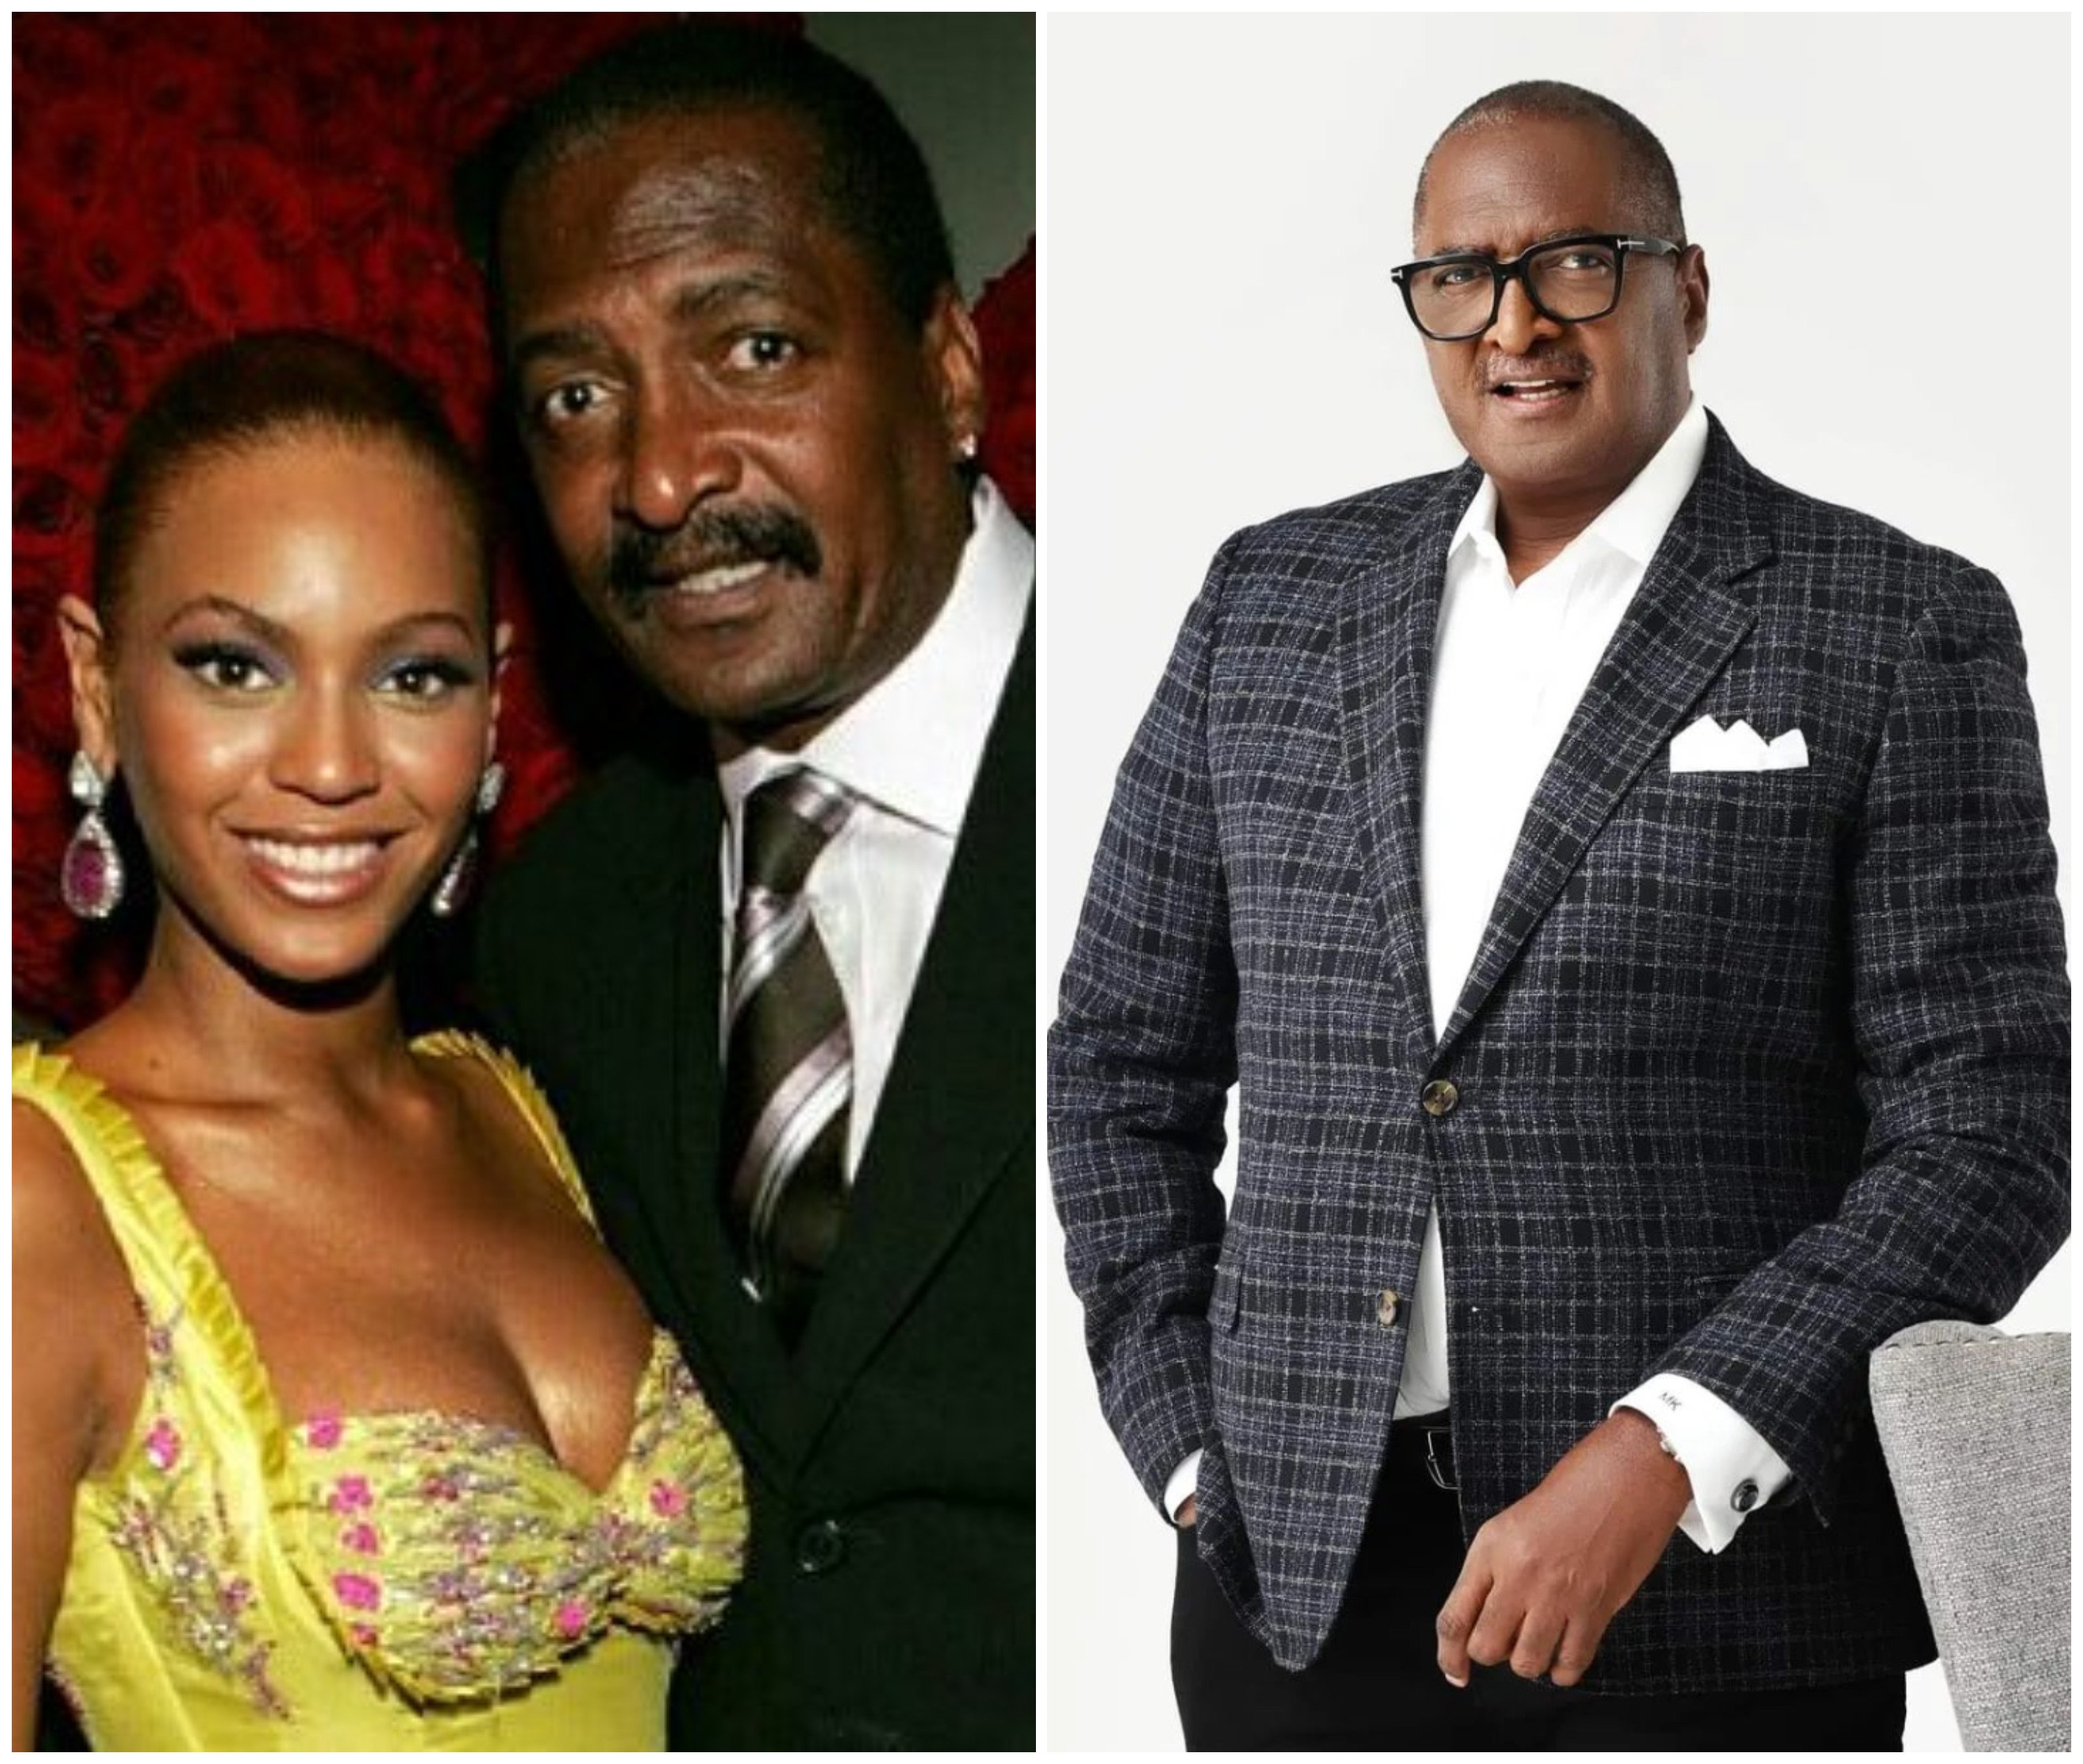 Mathew Knowles still has a good relationship with his daughter Beyoncé, but he’s been controversial over the years too... Photos: @BeyonceQueeny/X, @mrmathewknowles/Instagram